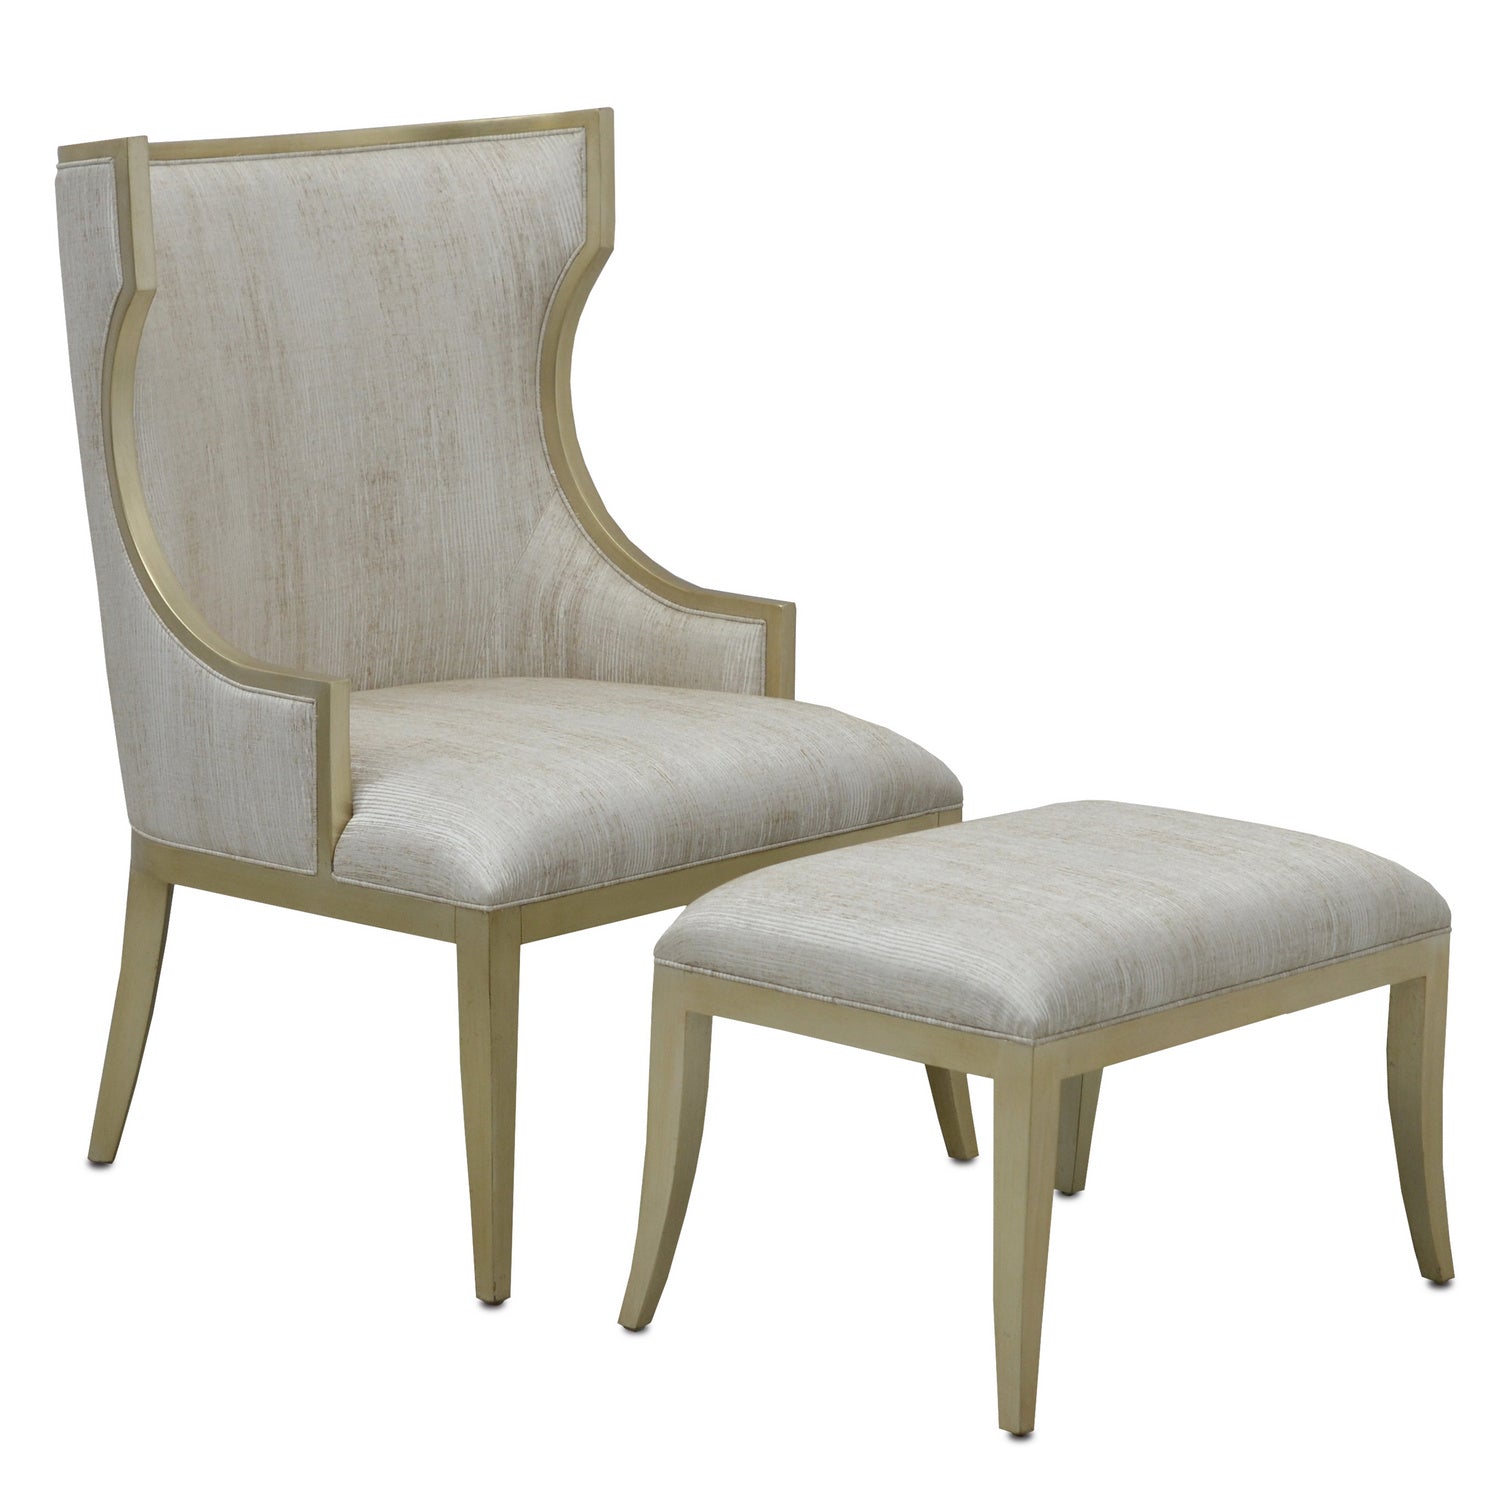 Chair from the Garson collection in Silver/Fresh File Linen finish